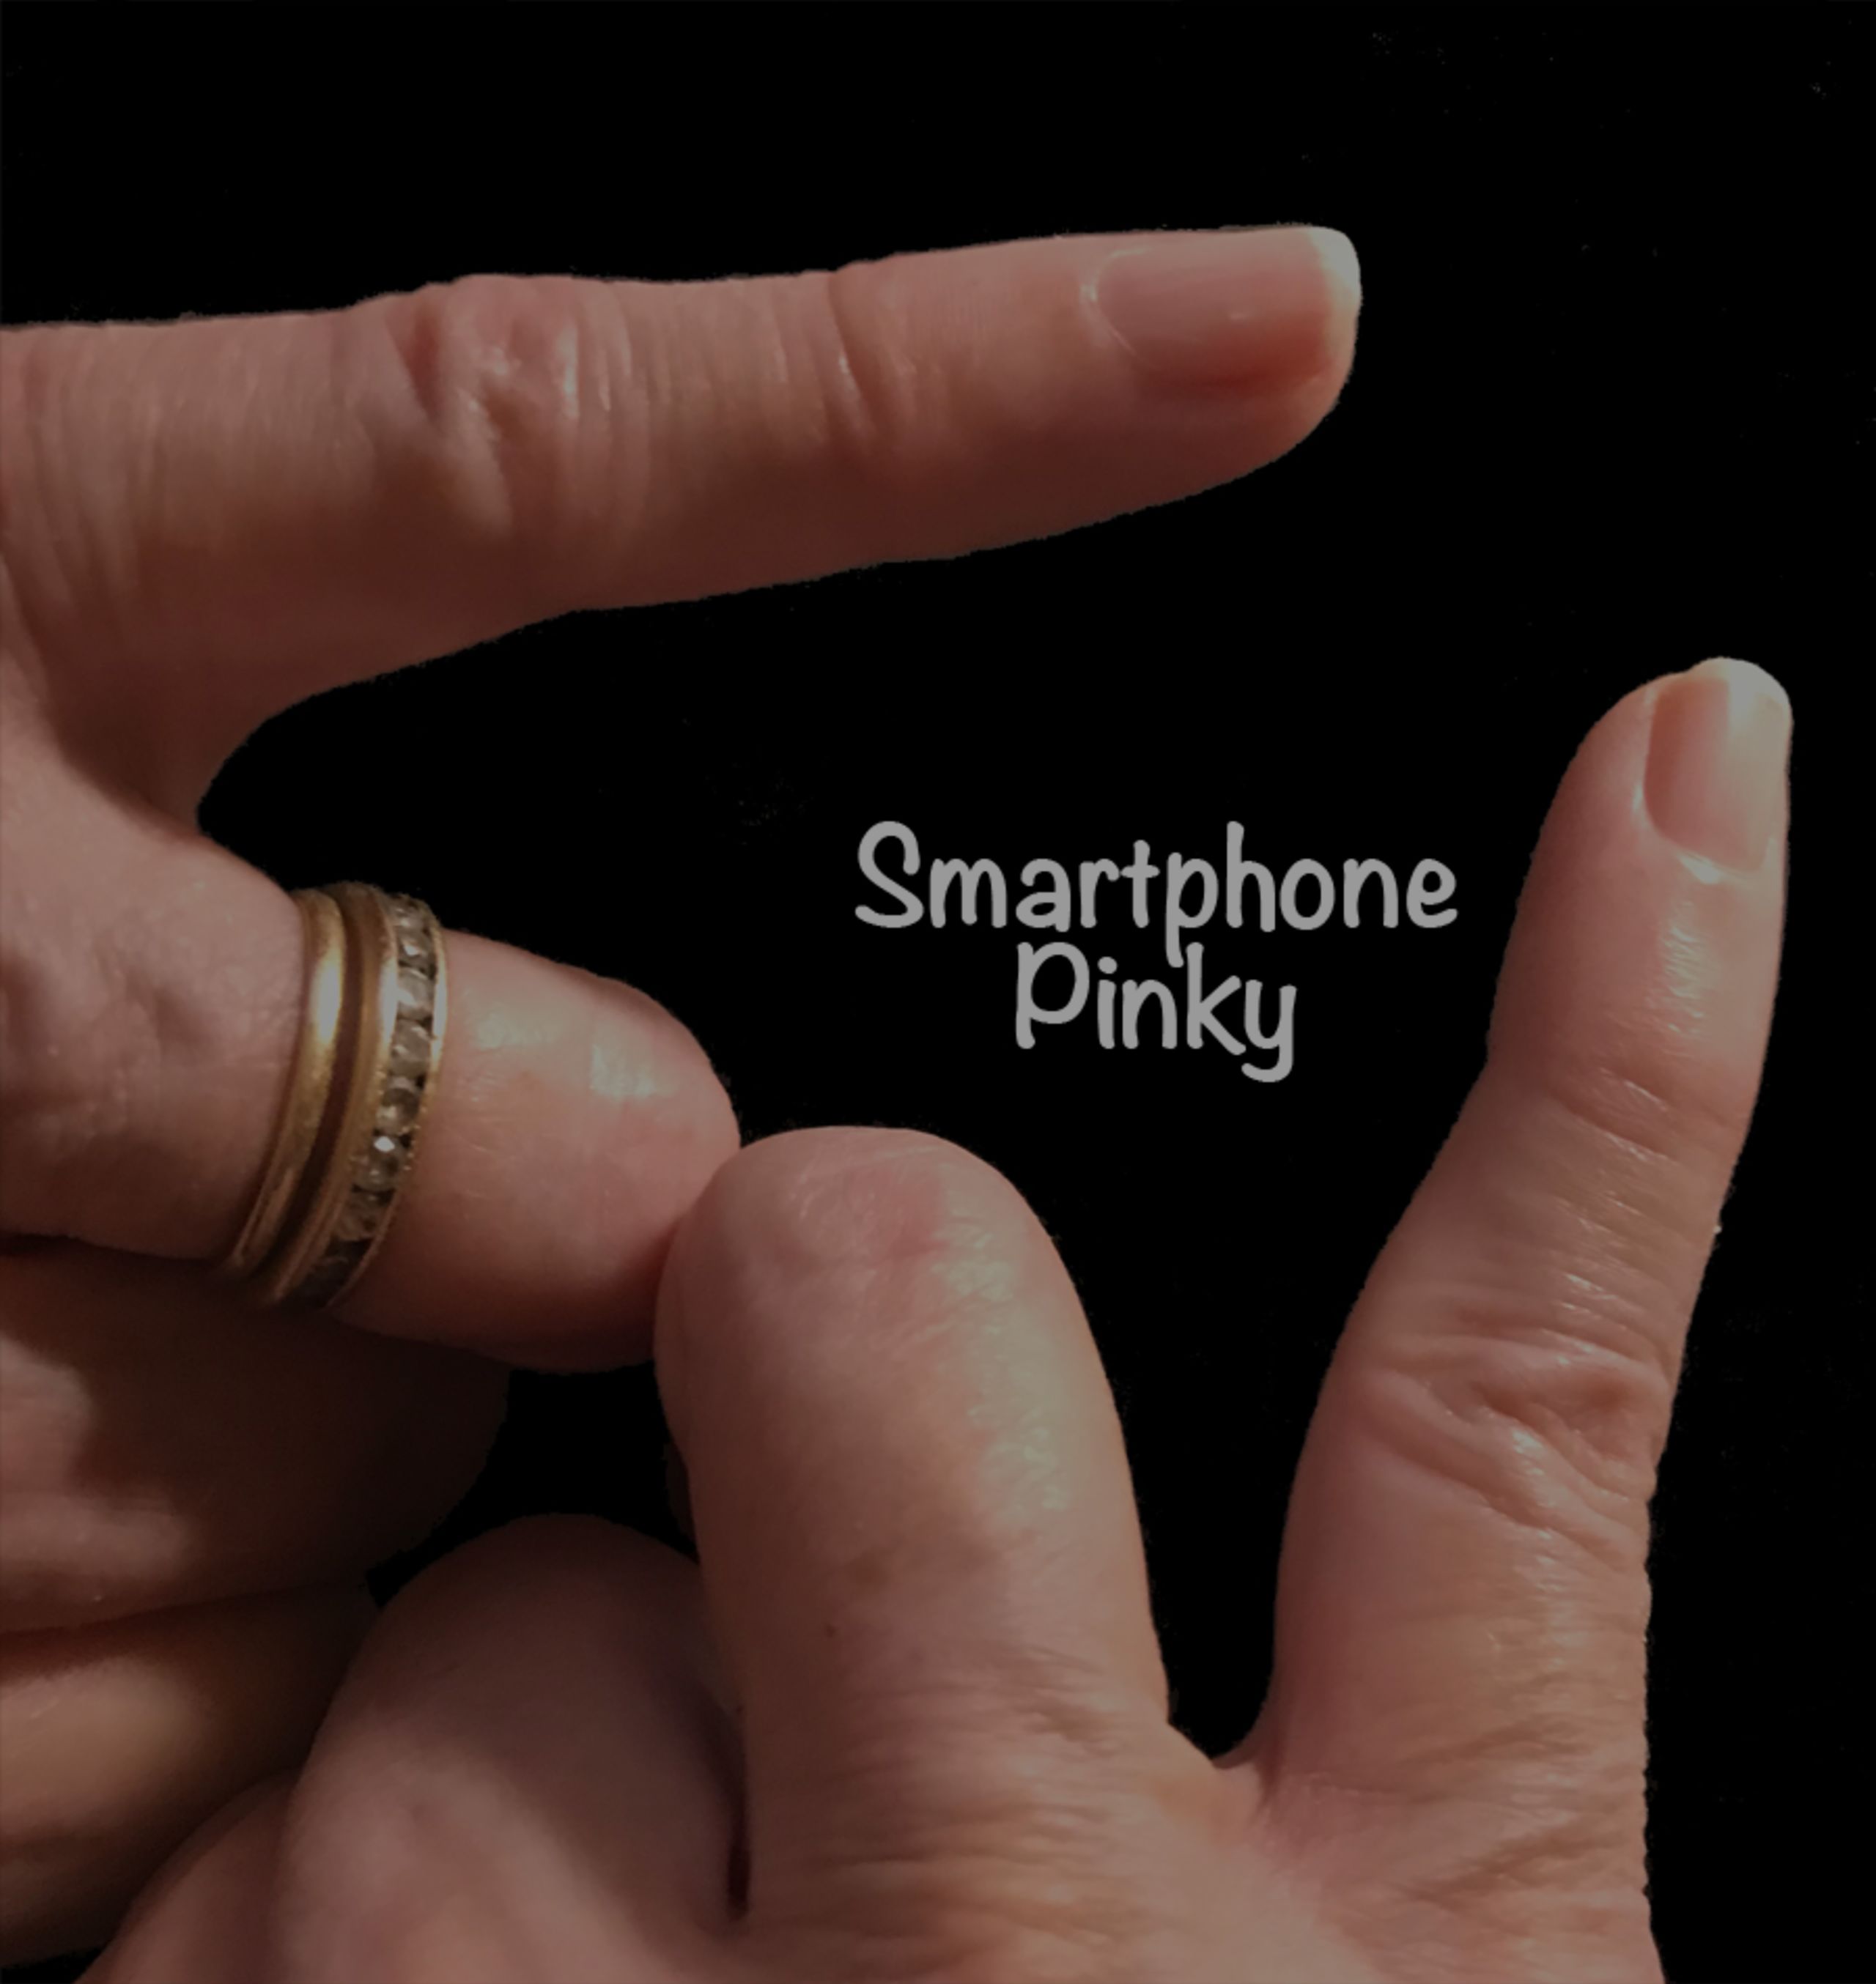 Smartphone pinky joins list of tech injuries